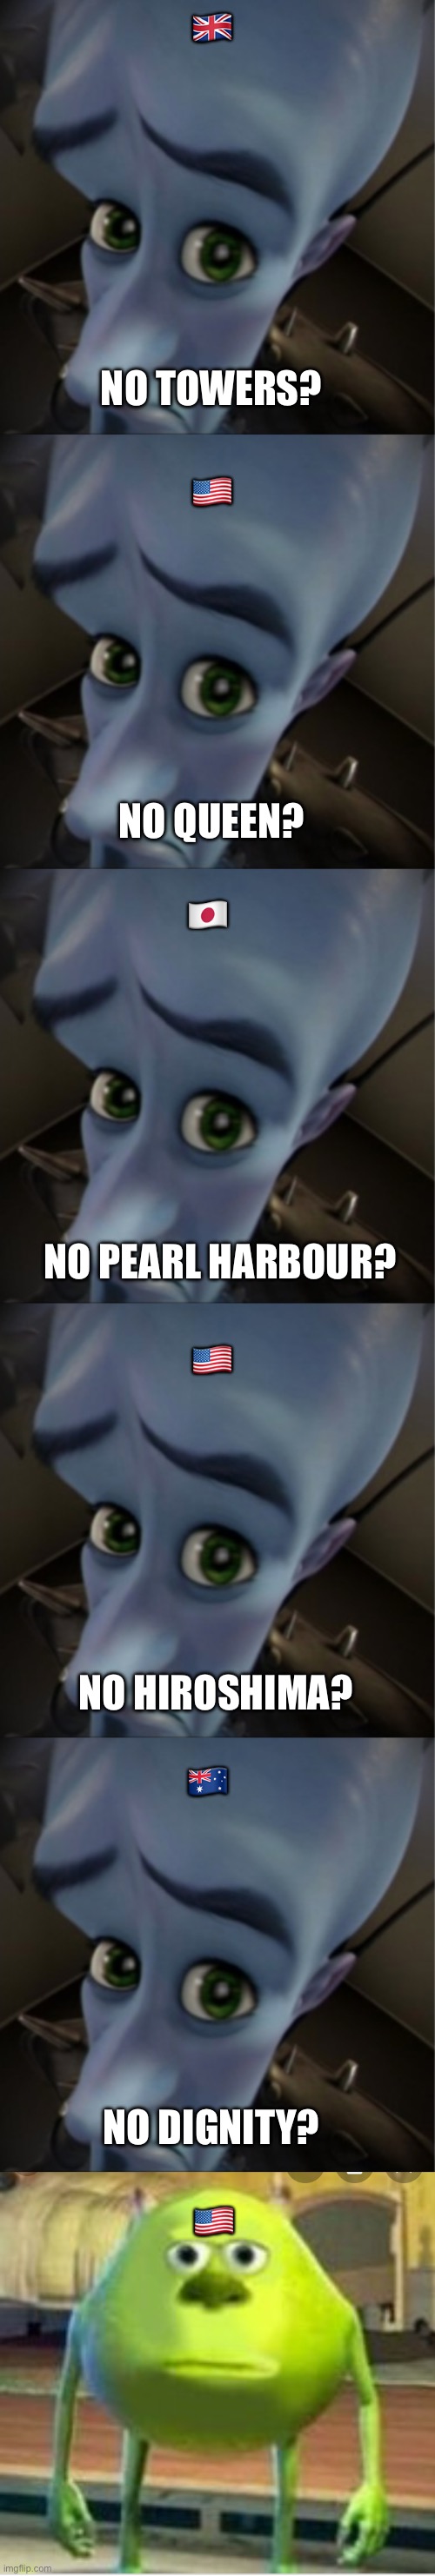 🇬🇧; NO TOWERS? 🇺🇸; NO QUEEN? 🇯🇵; NO PEARL HARBOUR? 🇺🇸; NO HIROSHIMA? 🇦🇺; NO DIGNITY? 🇺🇸 | image tagged in megamind peeking,mike wozaski stare | made w/ Imgflip meme maker